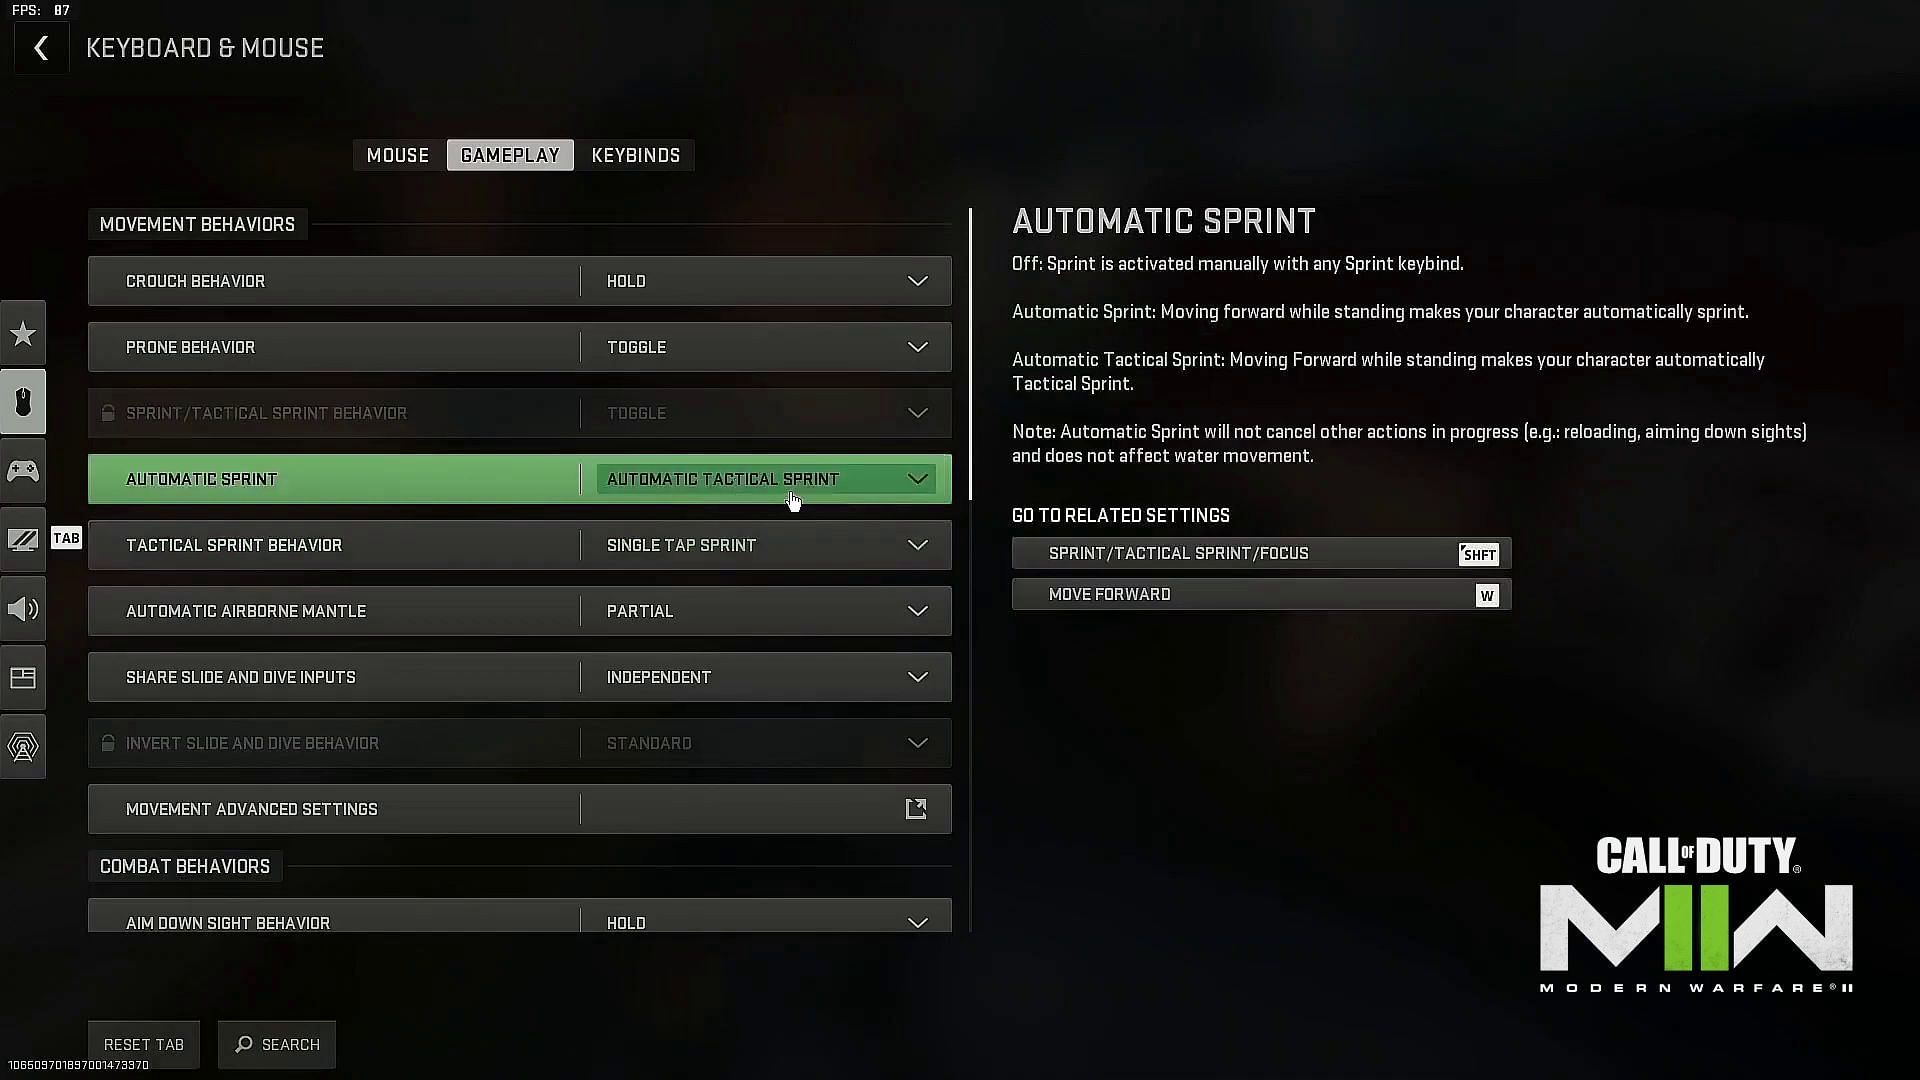 Change your Automatic Sprint settings (Image via Activision)